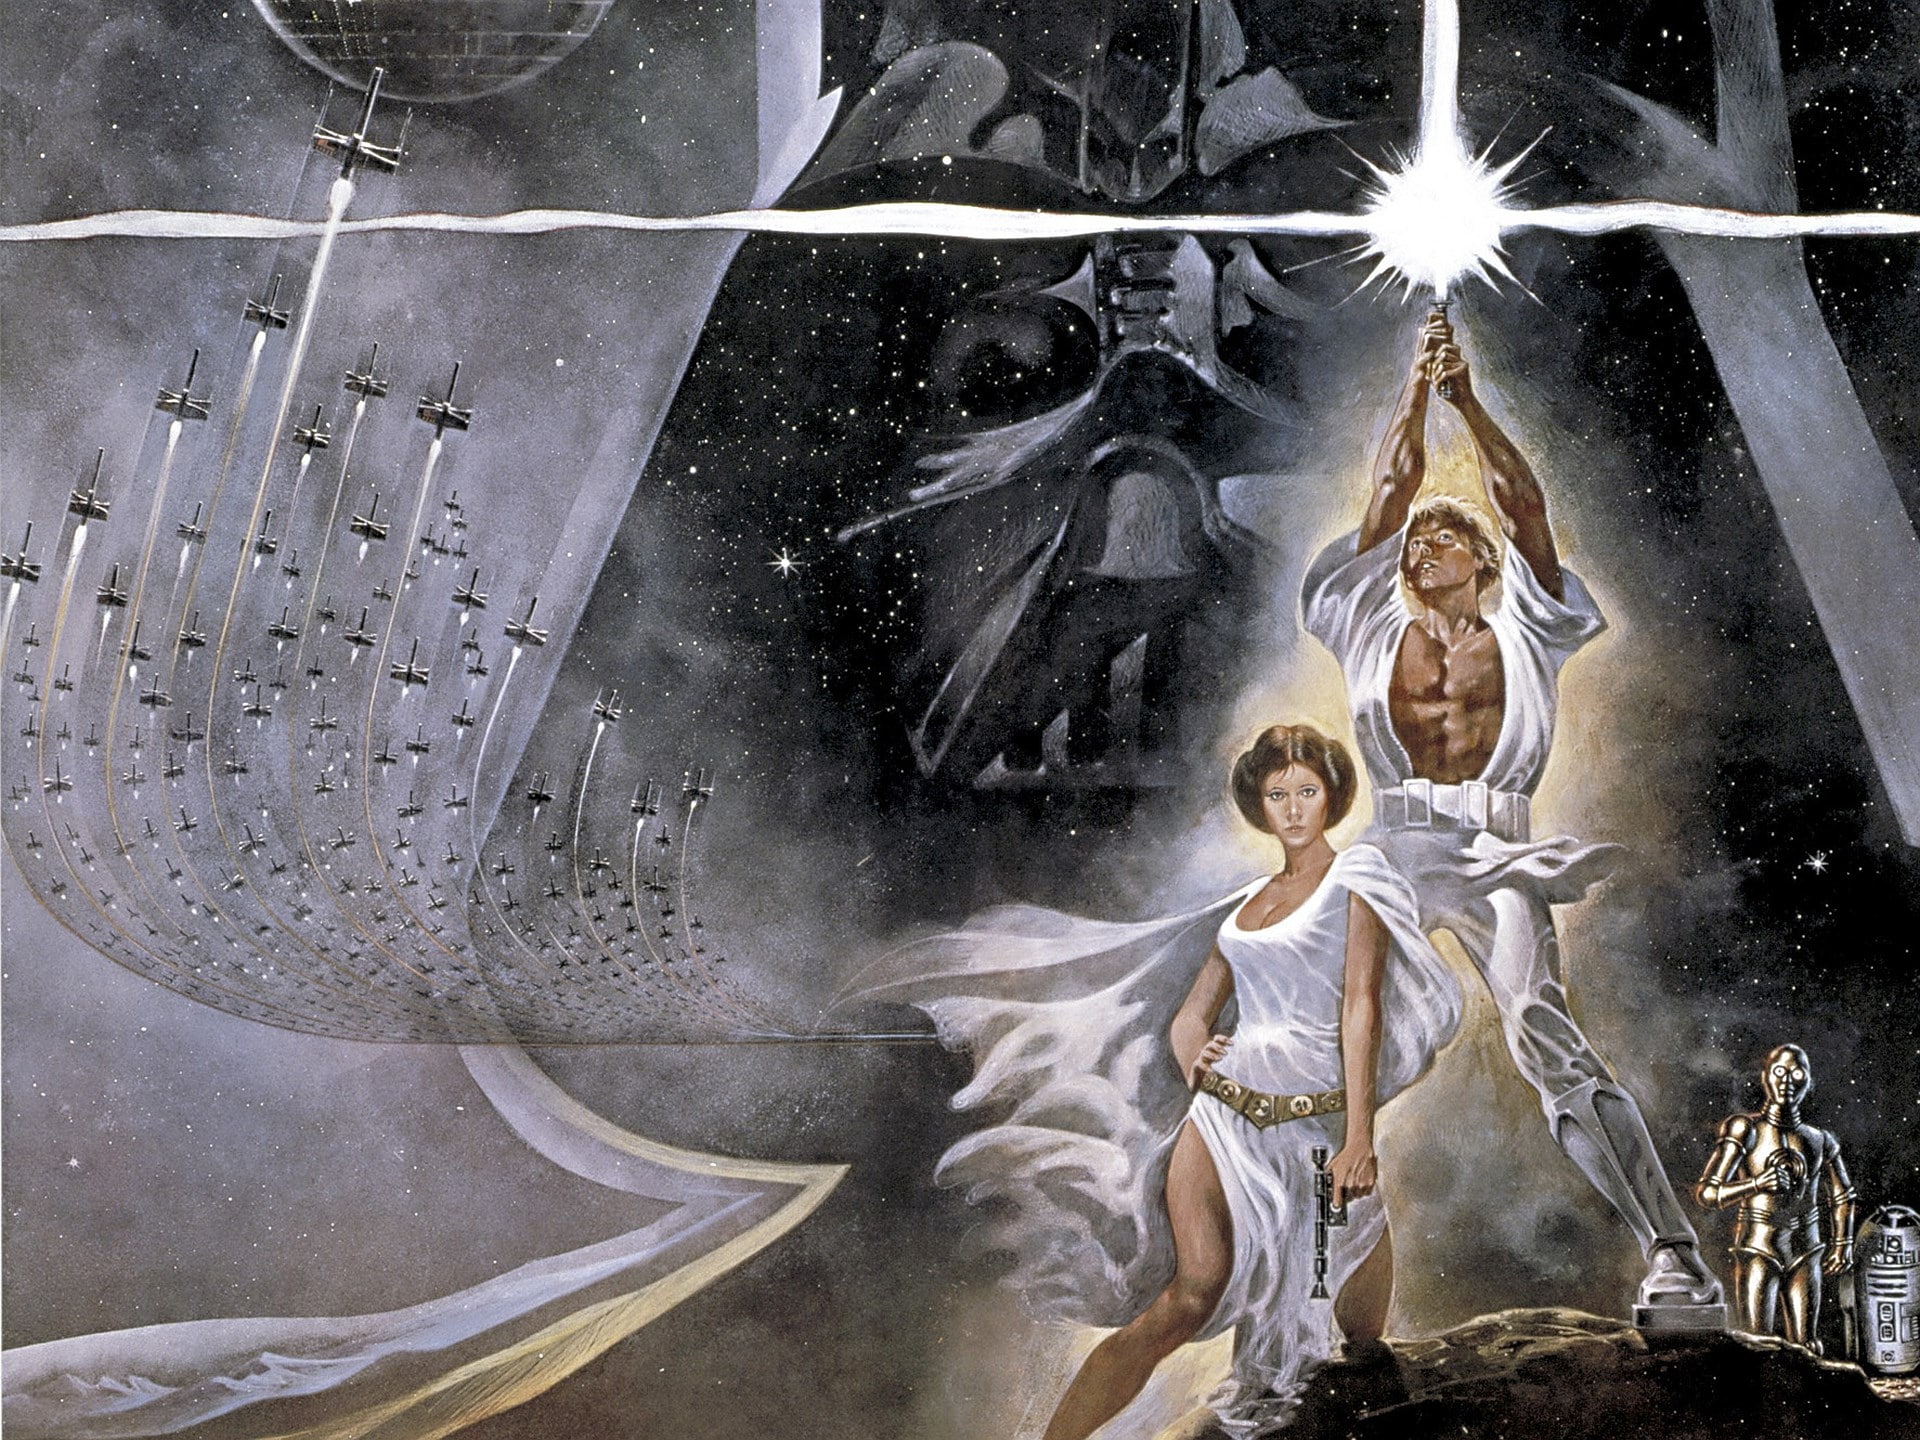 star wars episode iv a new hope, art and craft, representation